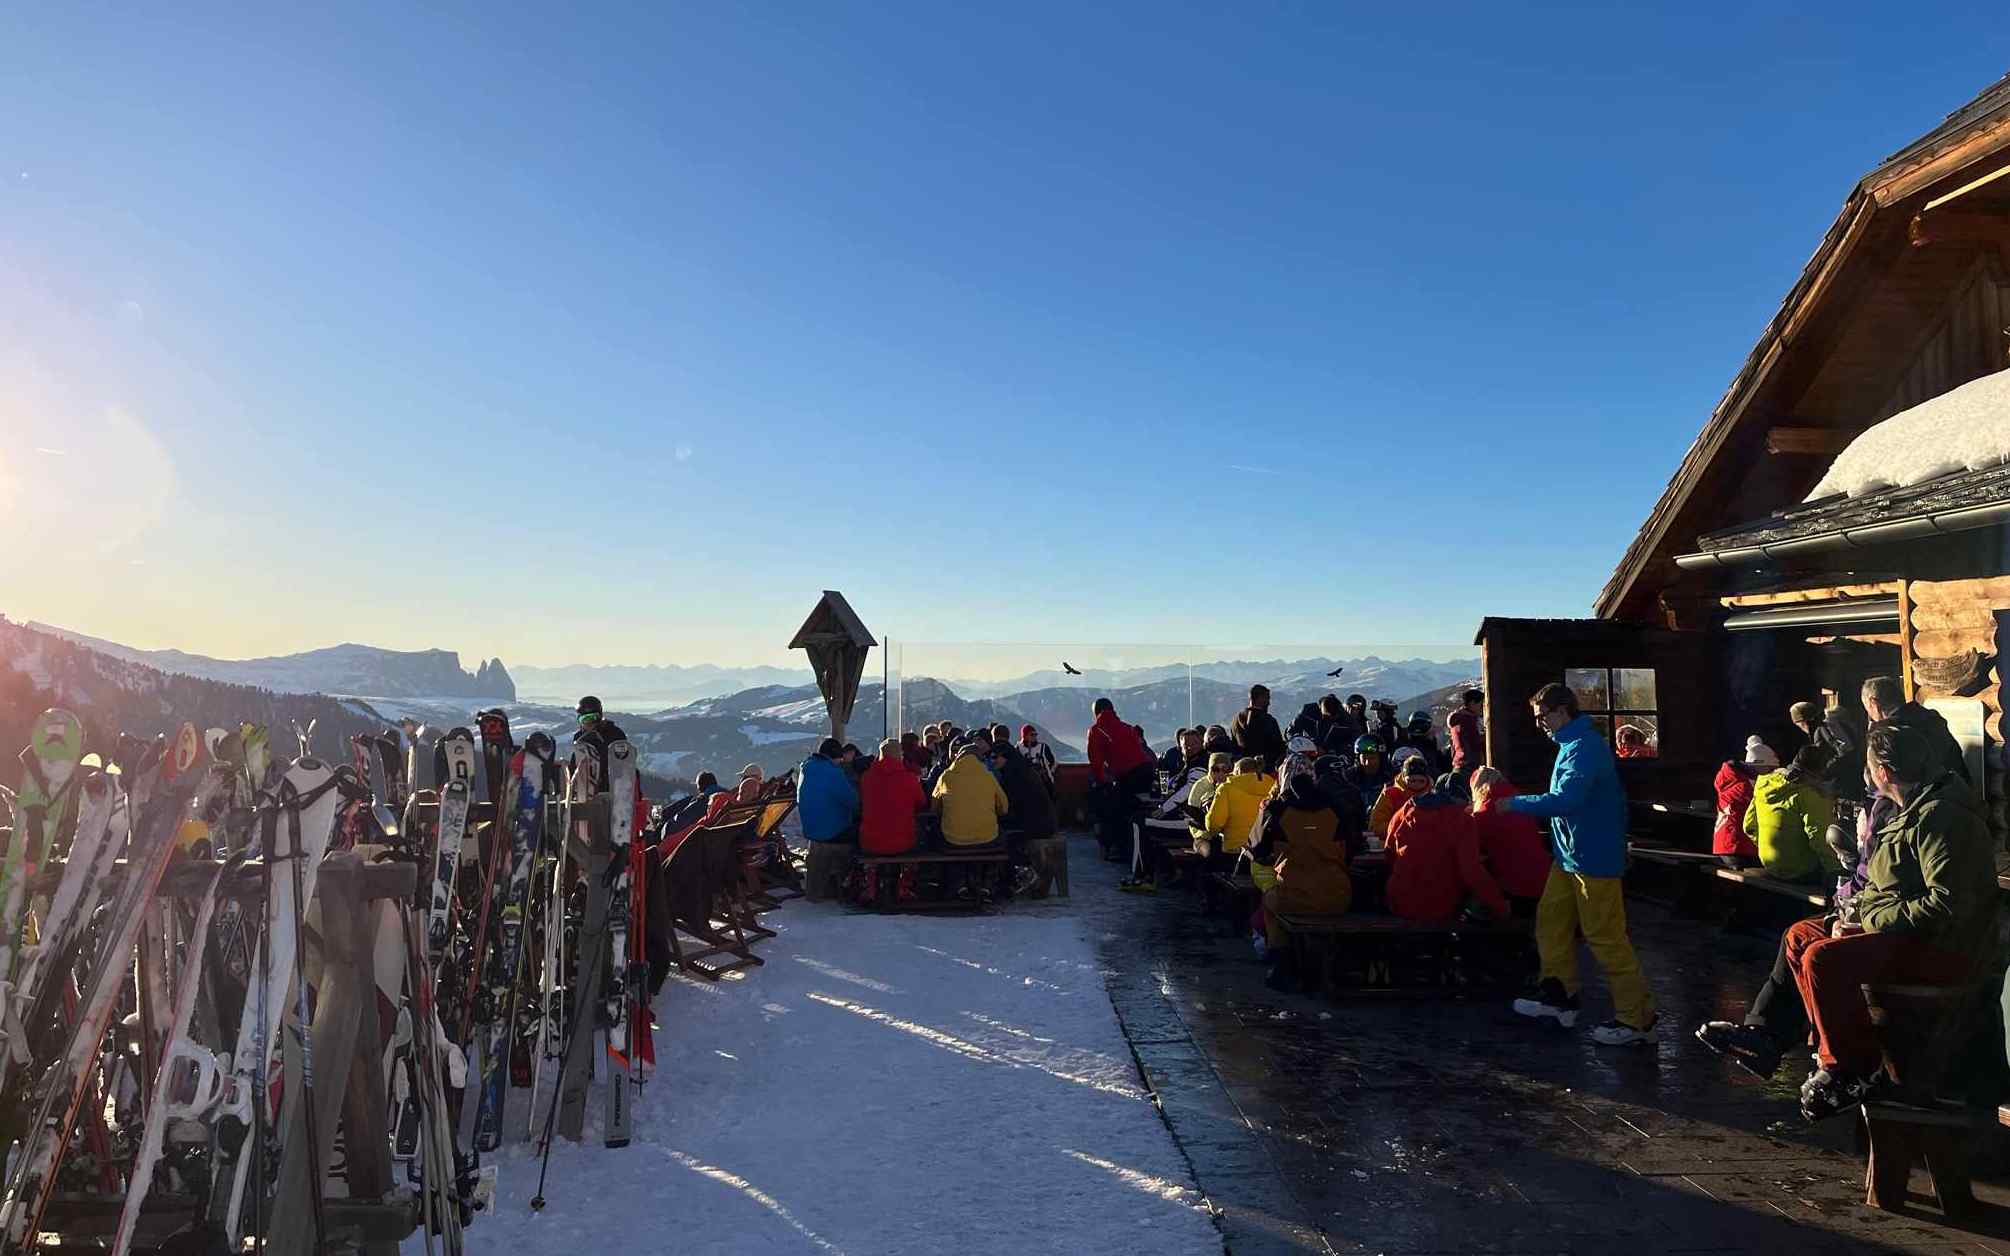 The 15 best places for après-ski in Europe - WeSki